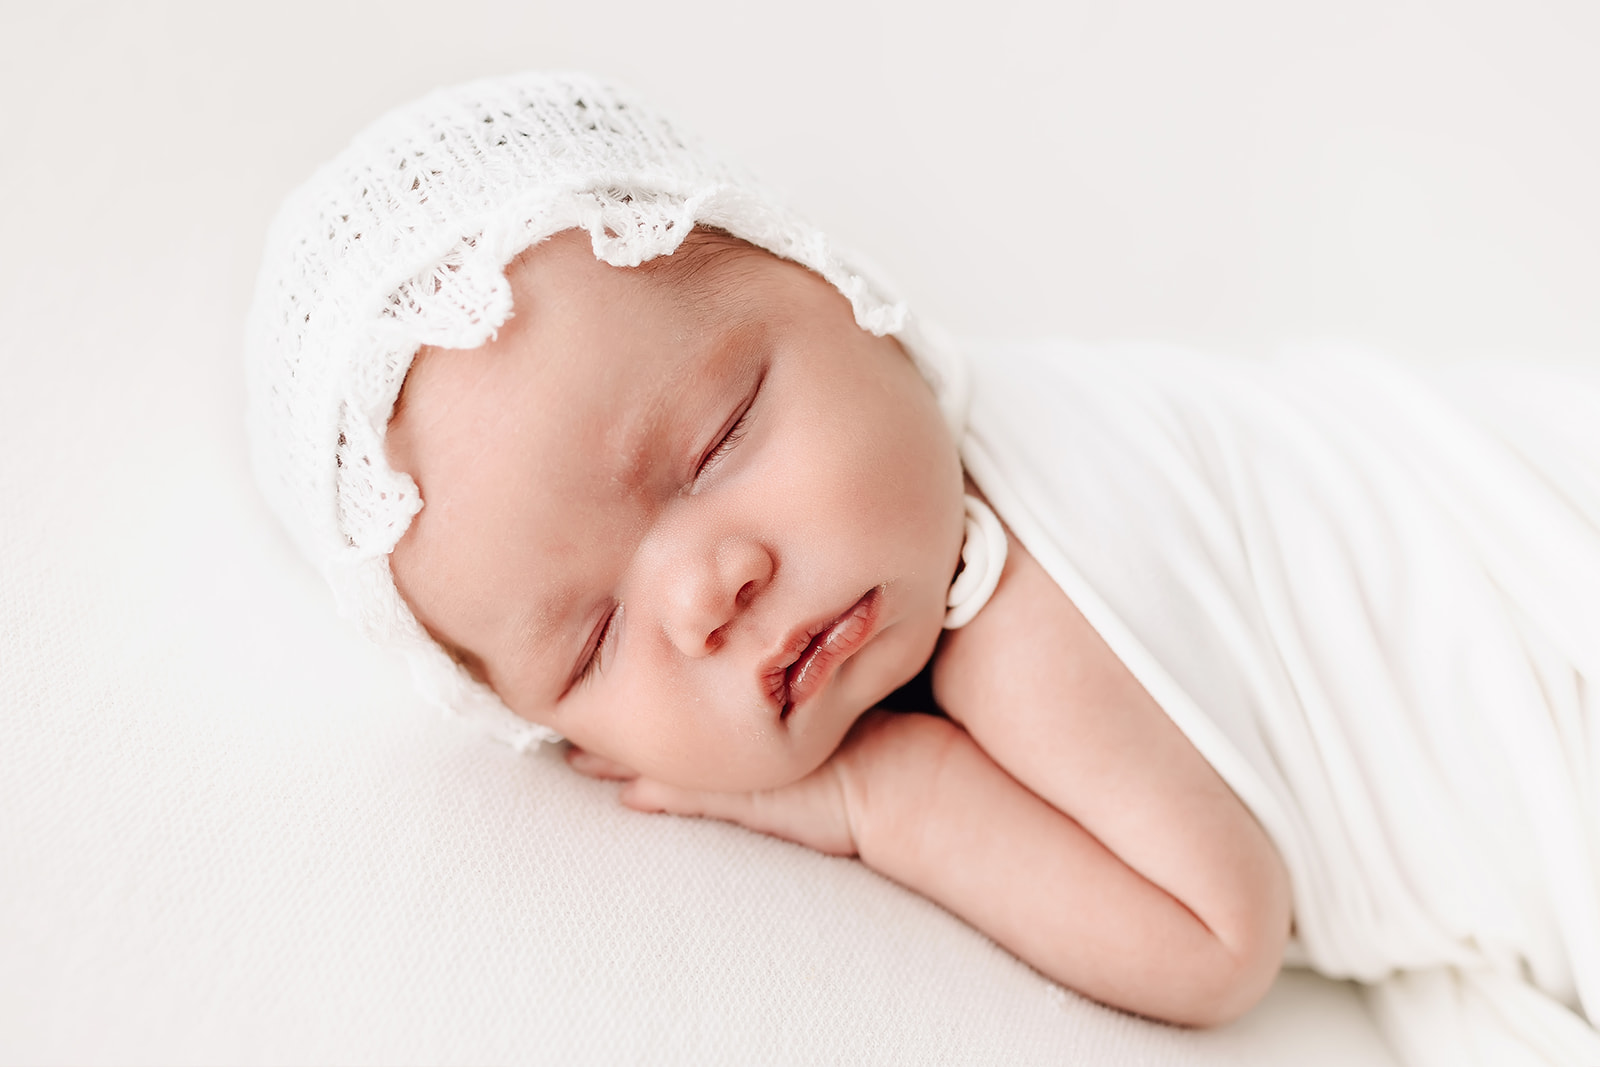 A newborn baby sleeps in a white bed on it's hands